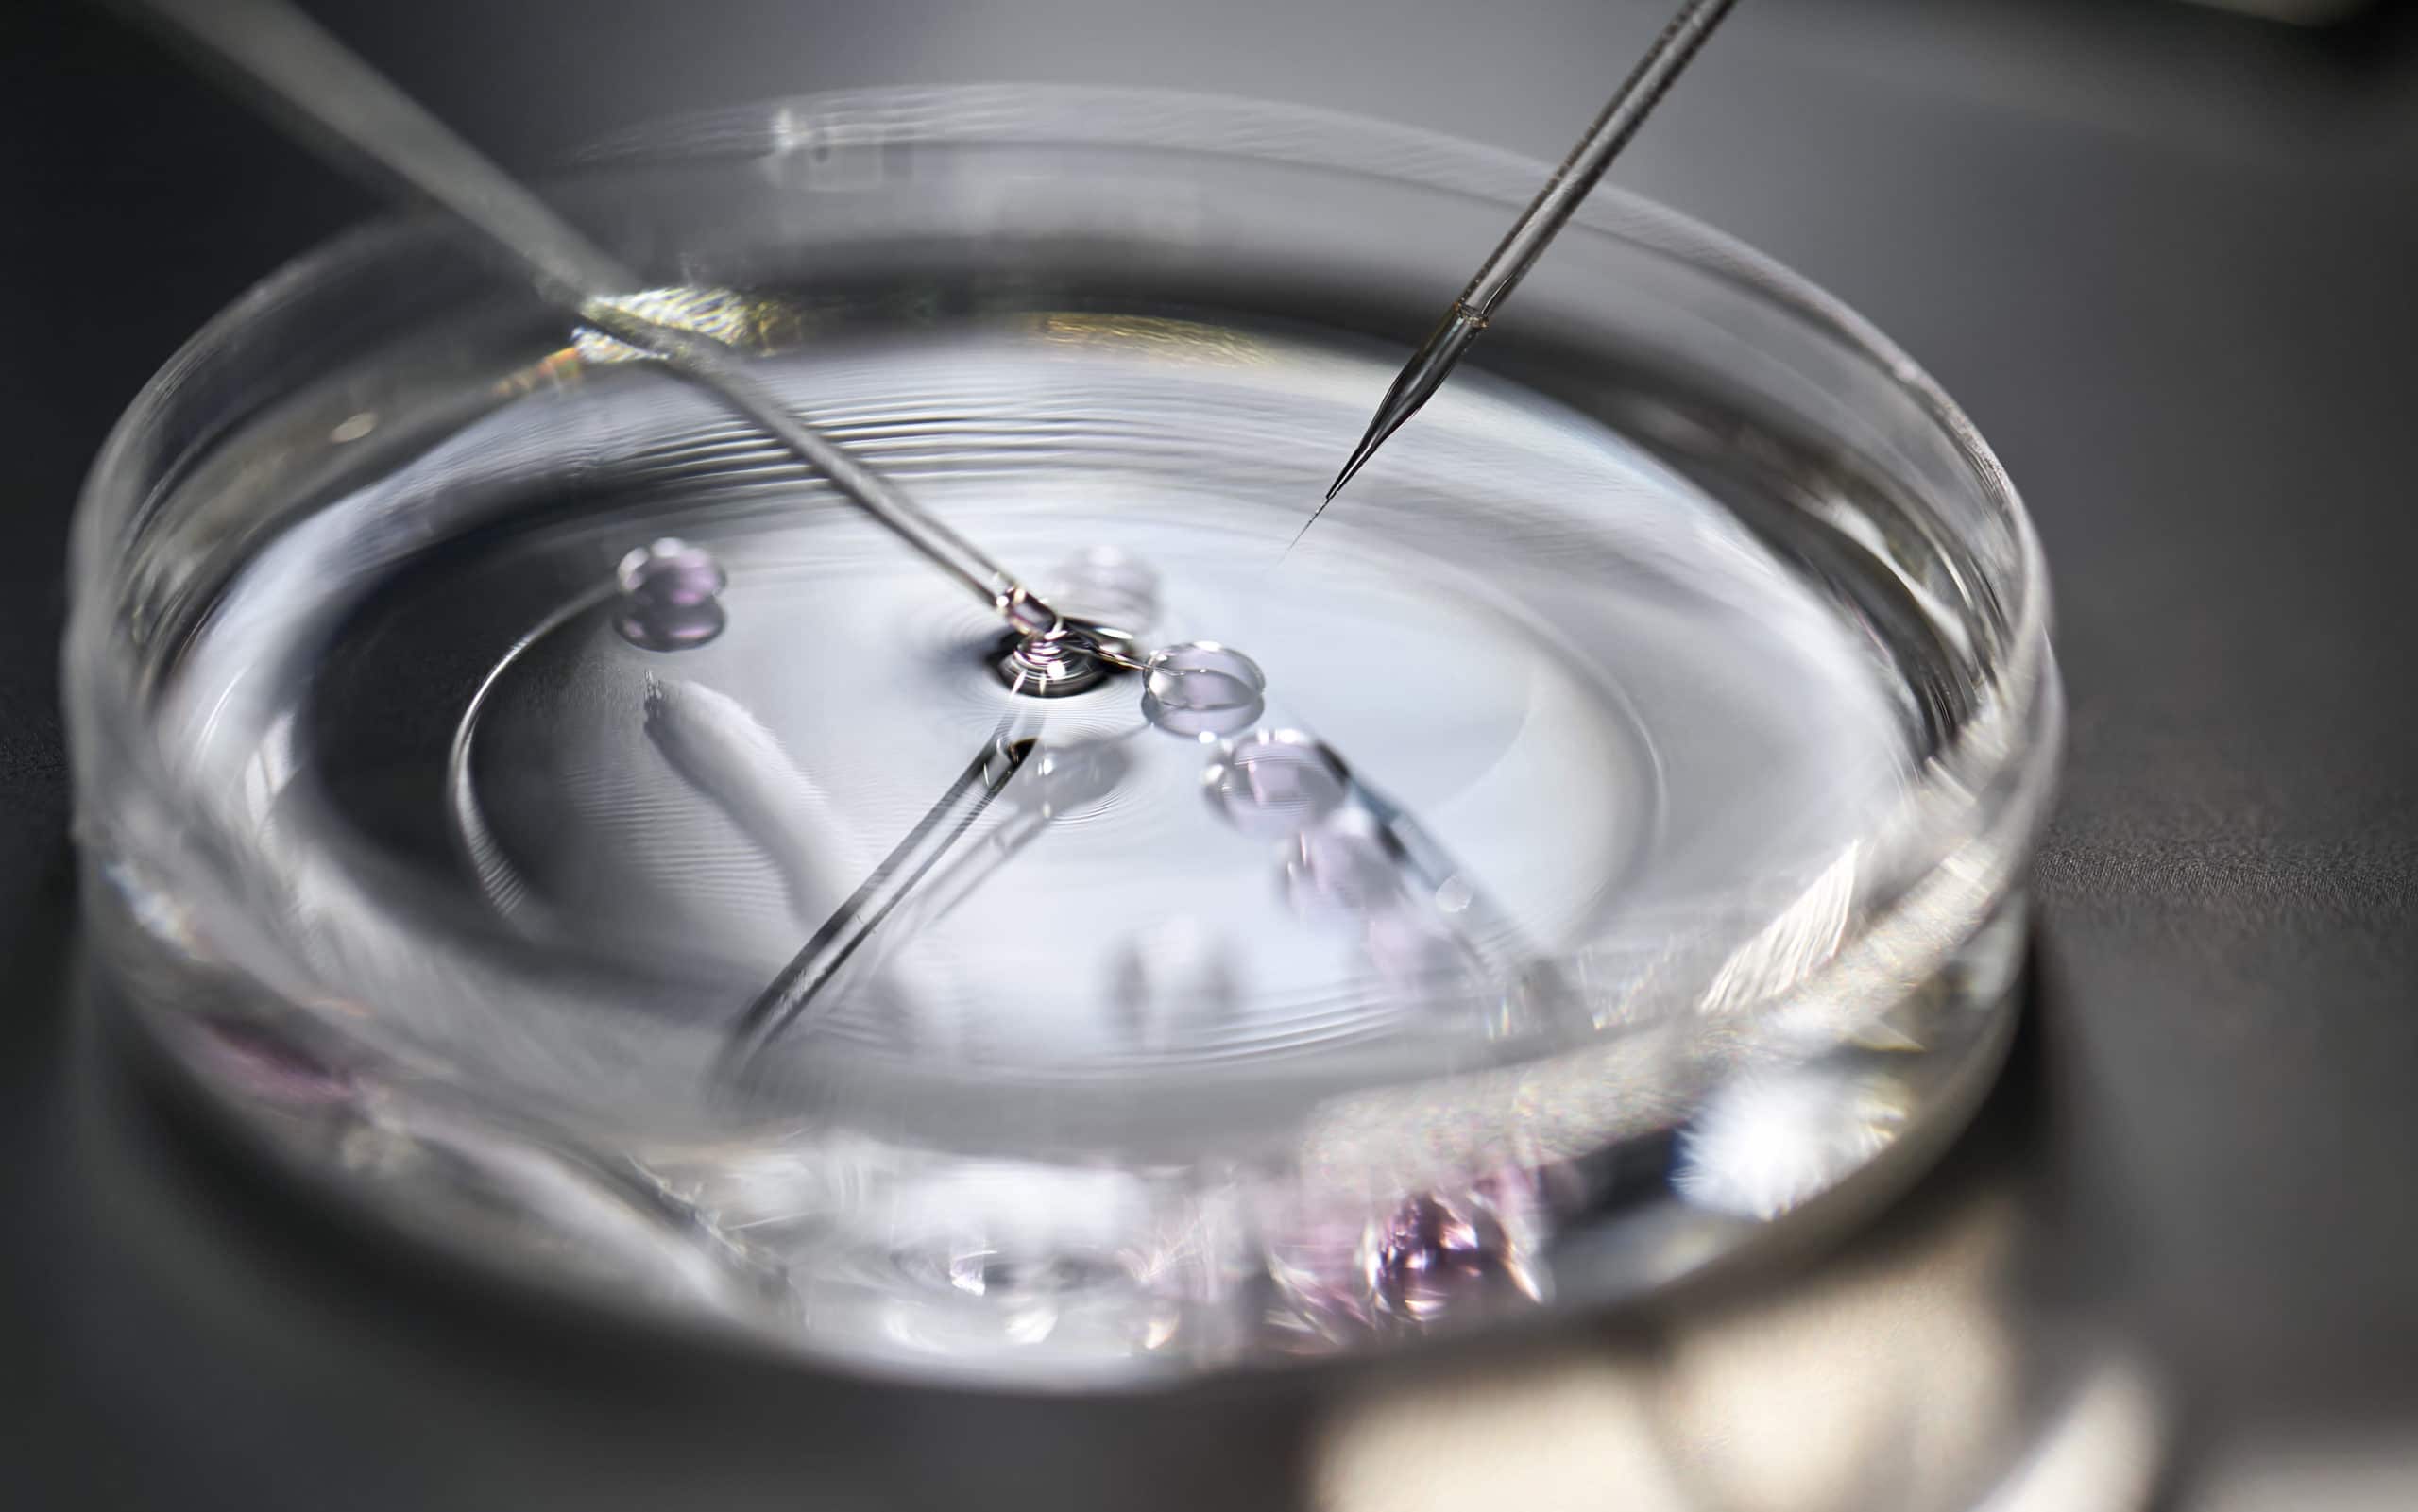 In Vitro Fertilization Ethical Issues